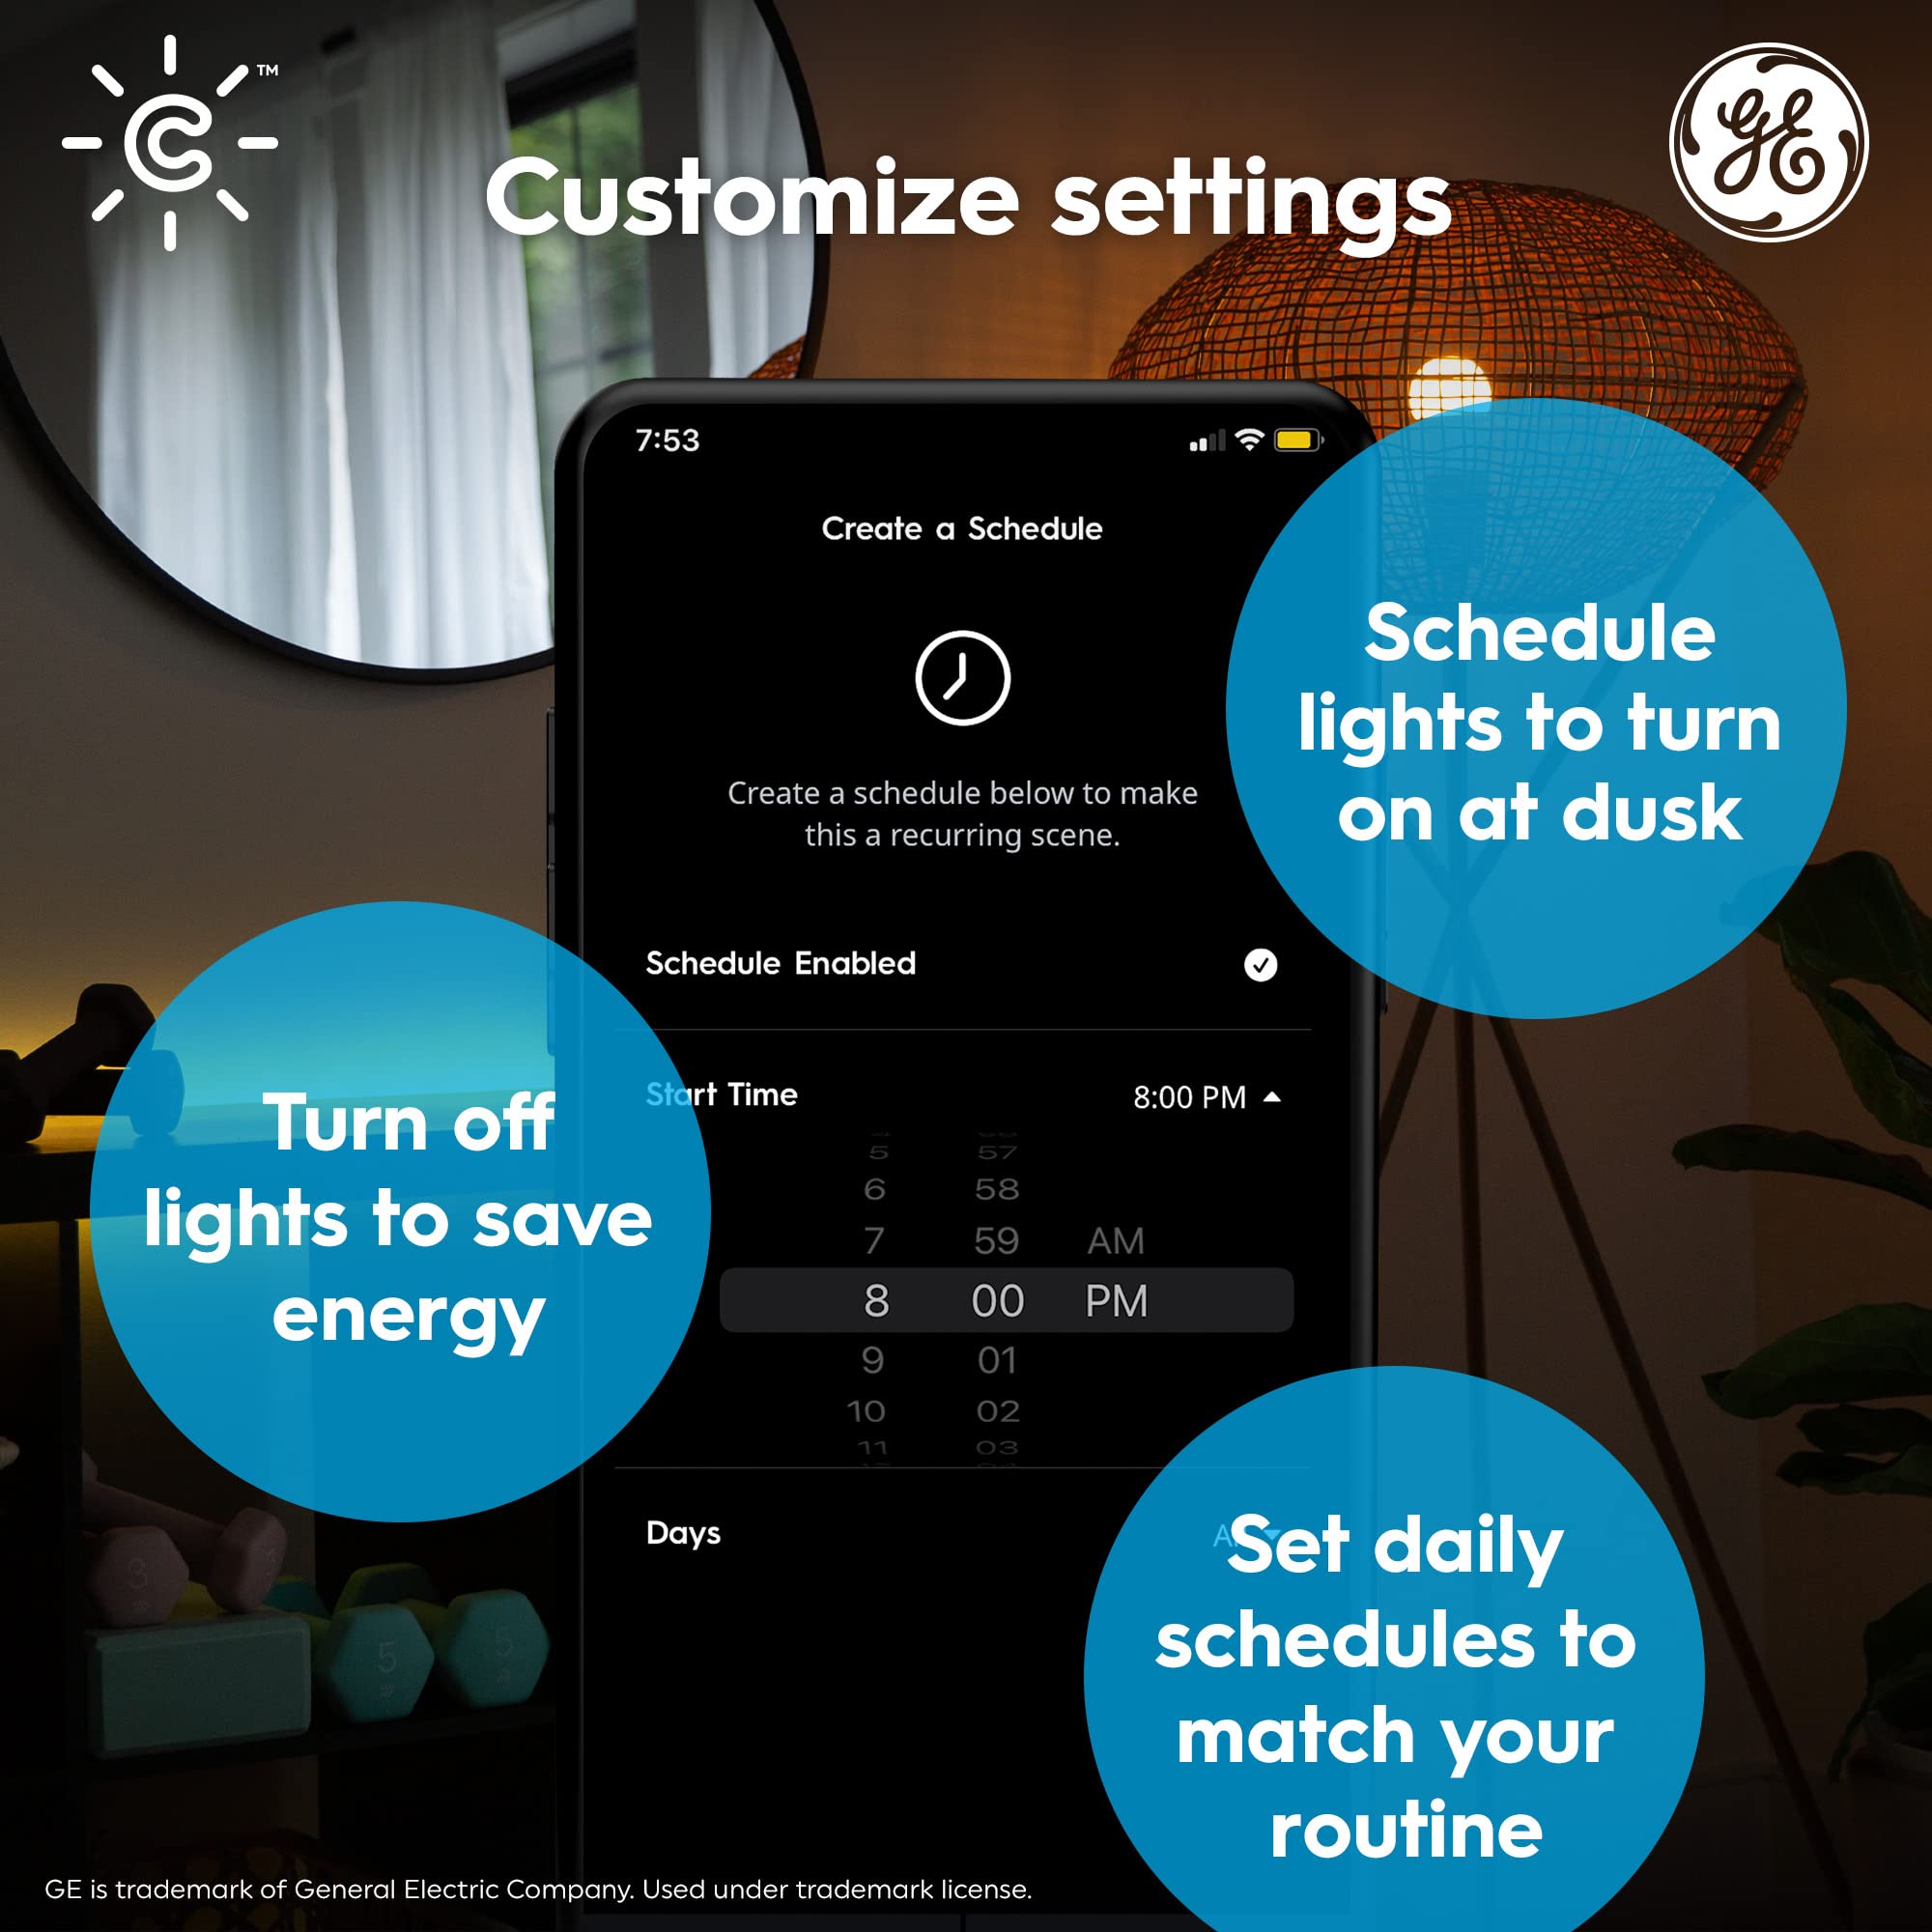 GE Lighting CYNC Smart LED Light Bulb, Color Changing Lights, Bluetooth and Wi-Fi Lights, Works with Alexa and Google Home, A19 Light Bulb (1 Pack)